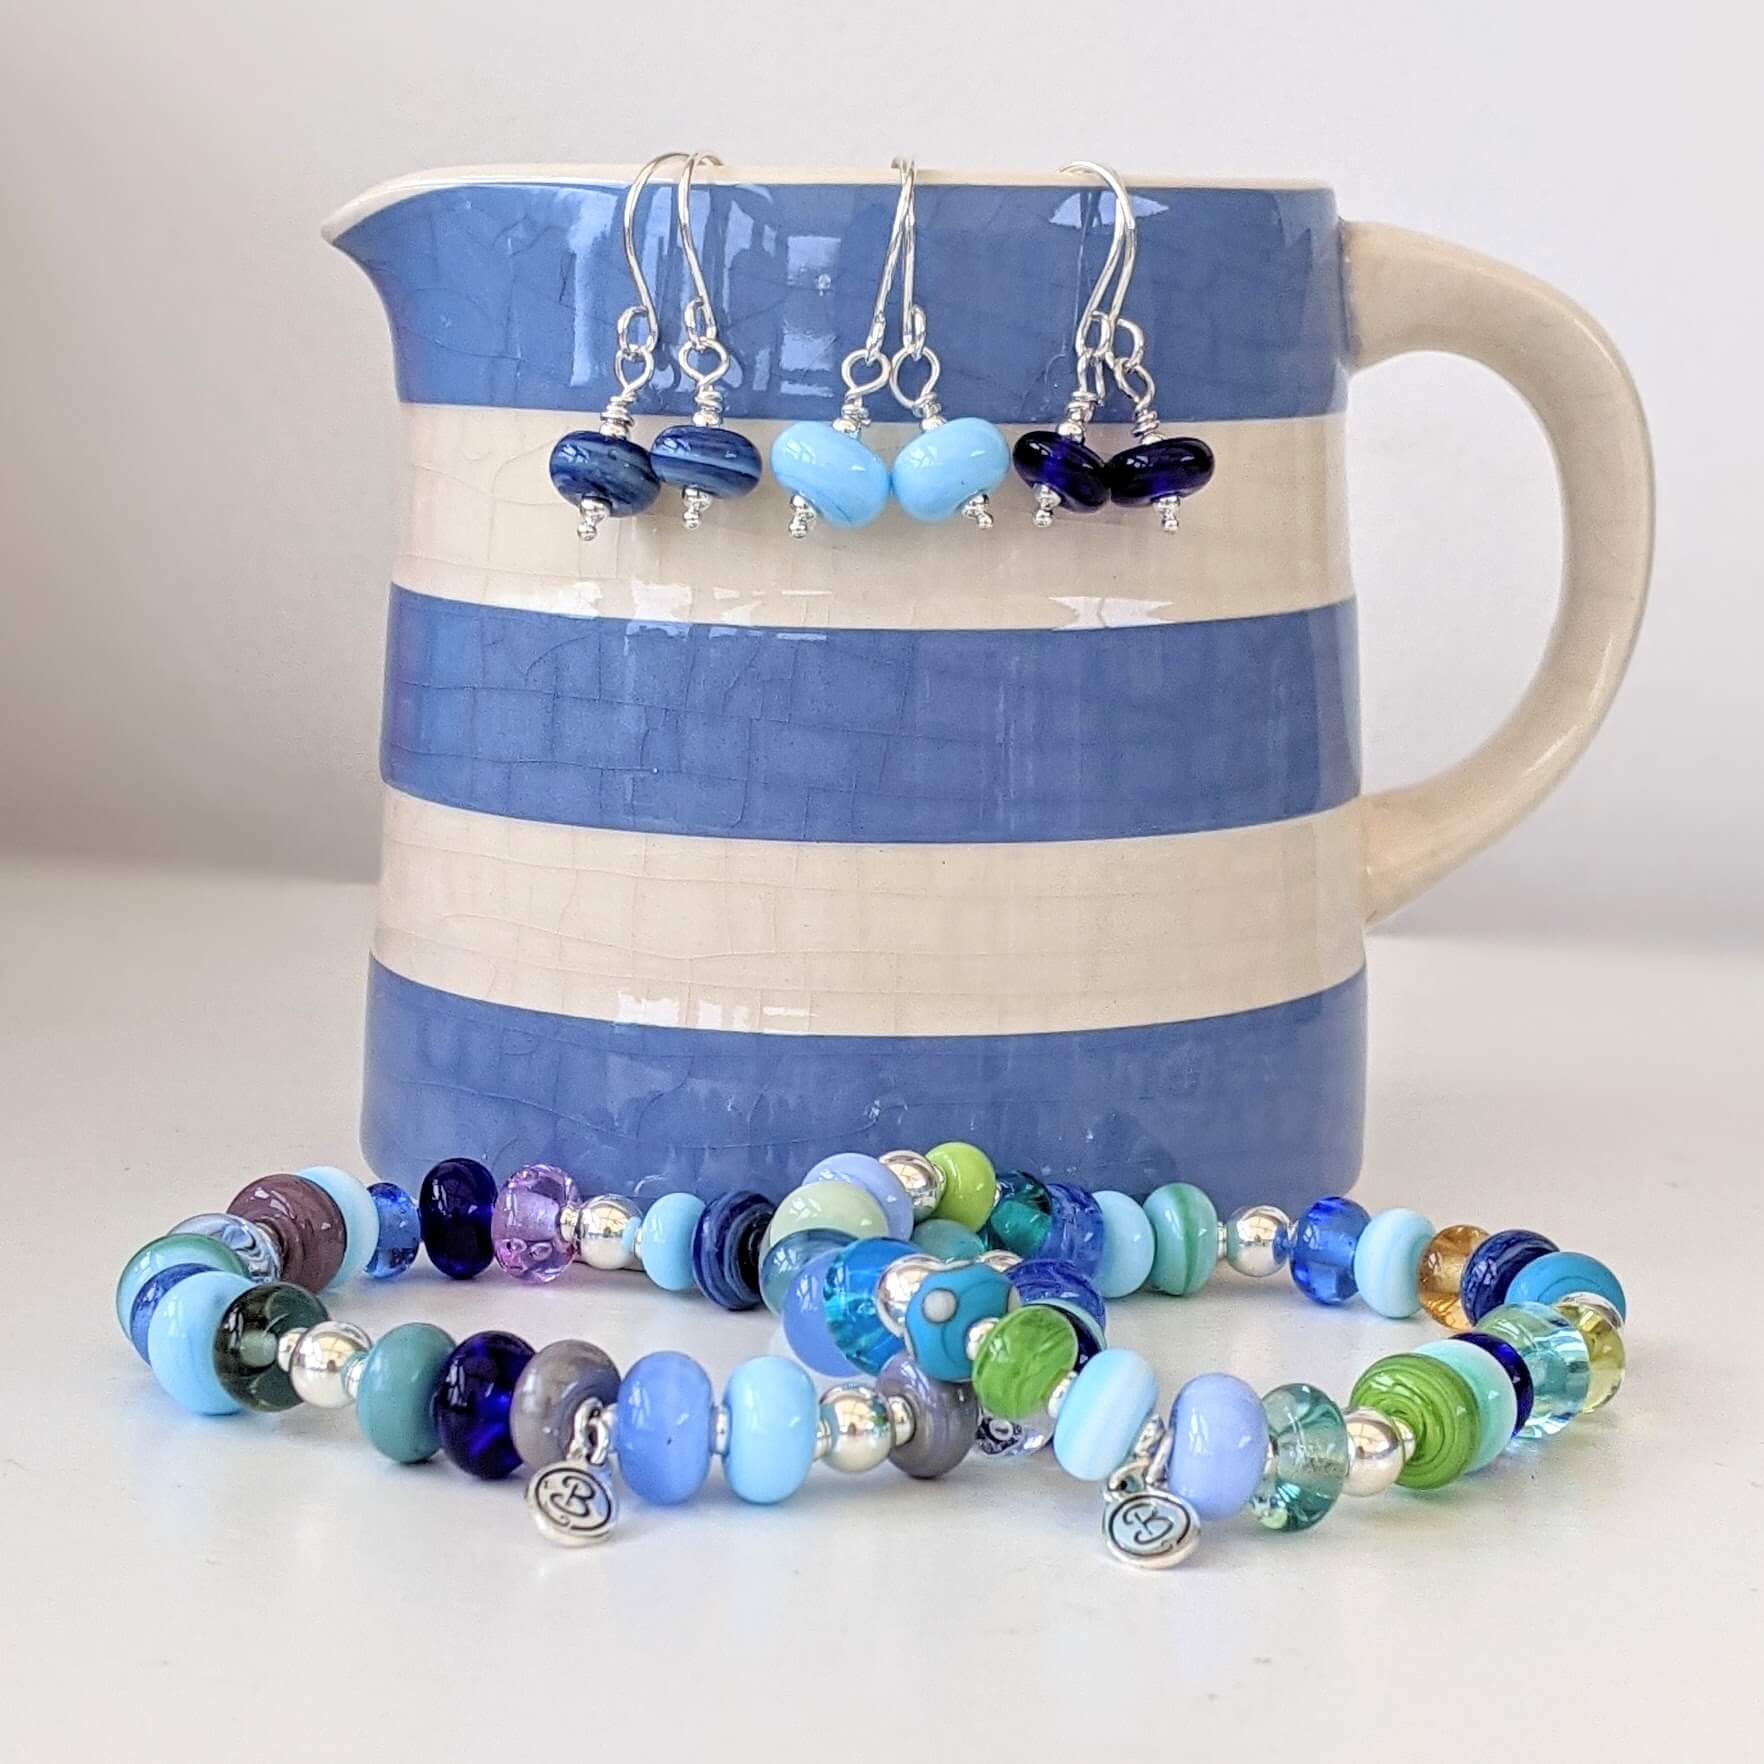 Cat Charm Bracelet with Blue Glass Beads - The Purrfect Present